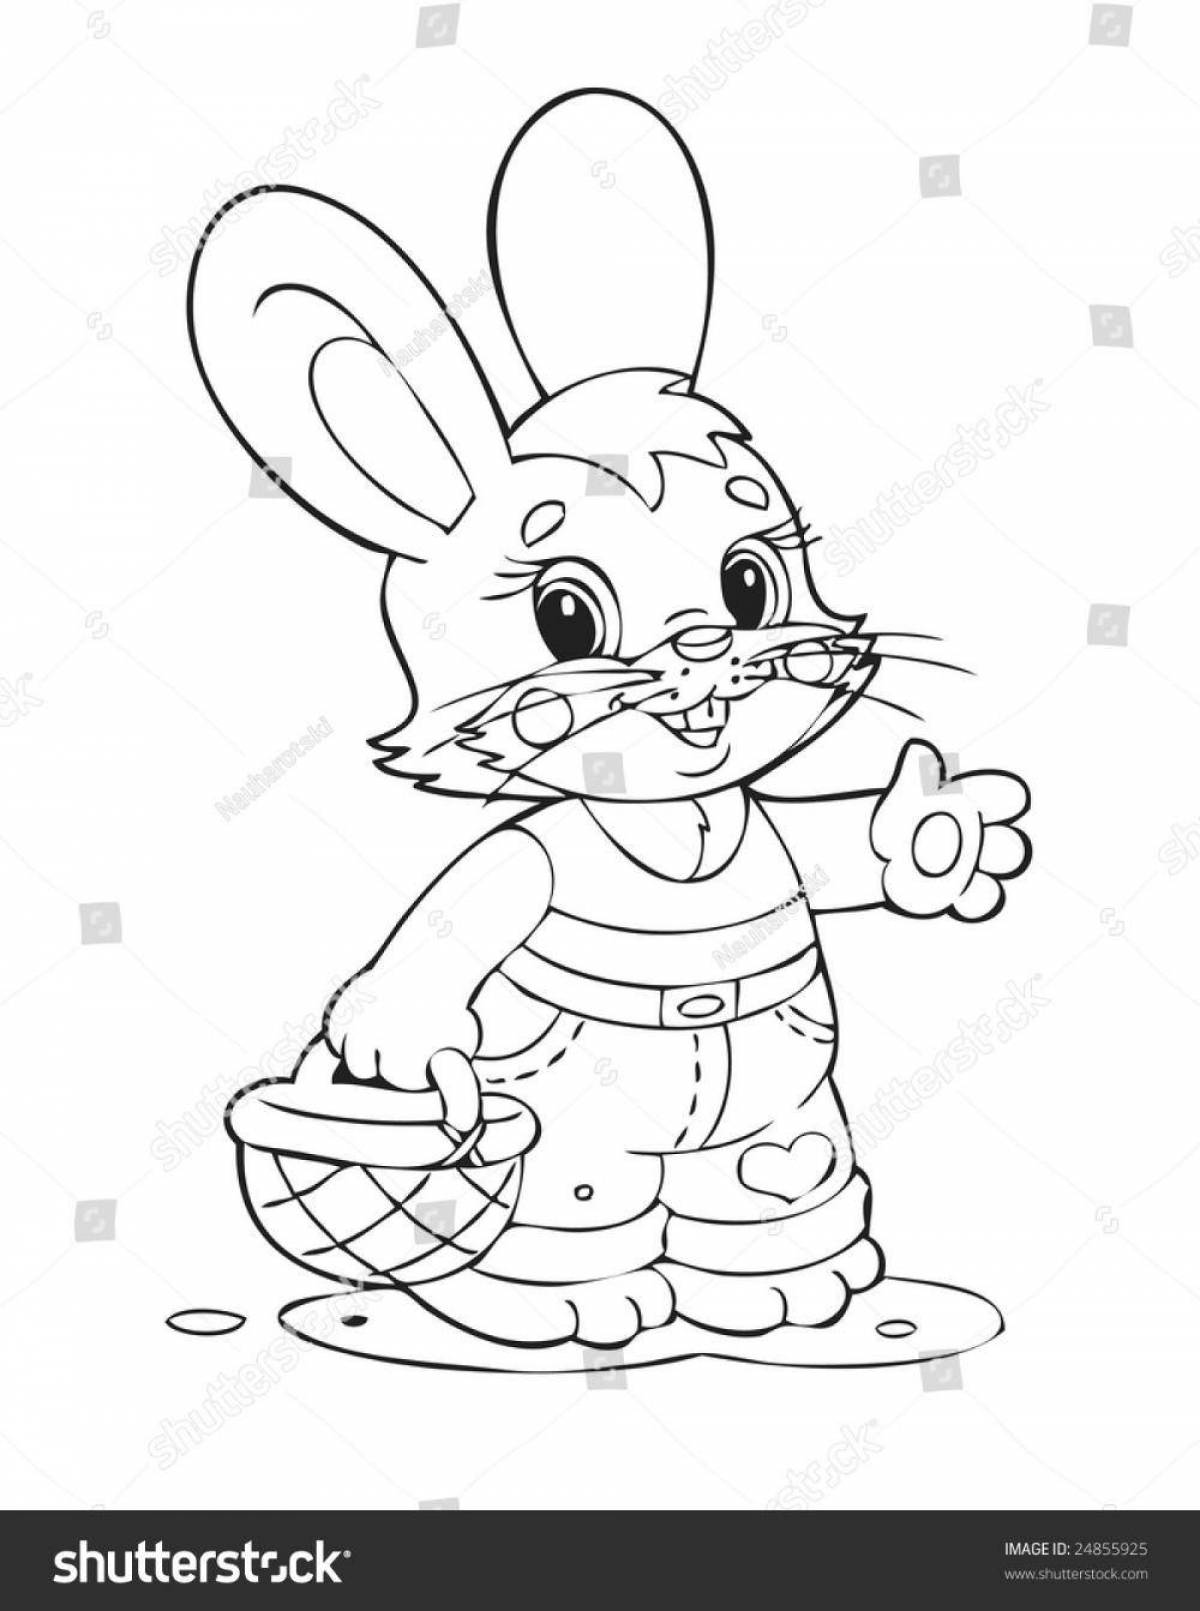 Snuggly rabbit on the bench coloring page